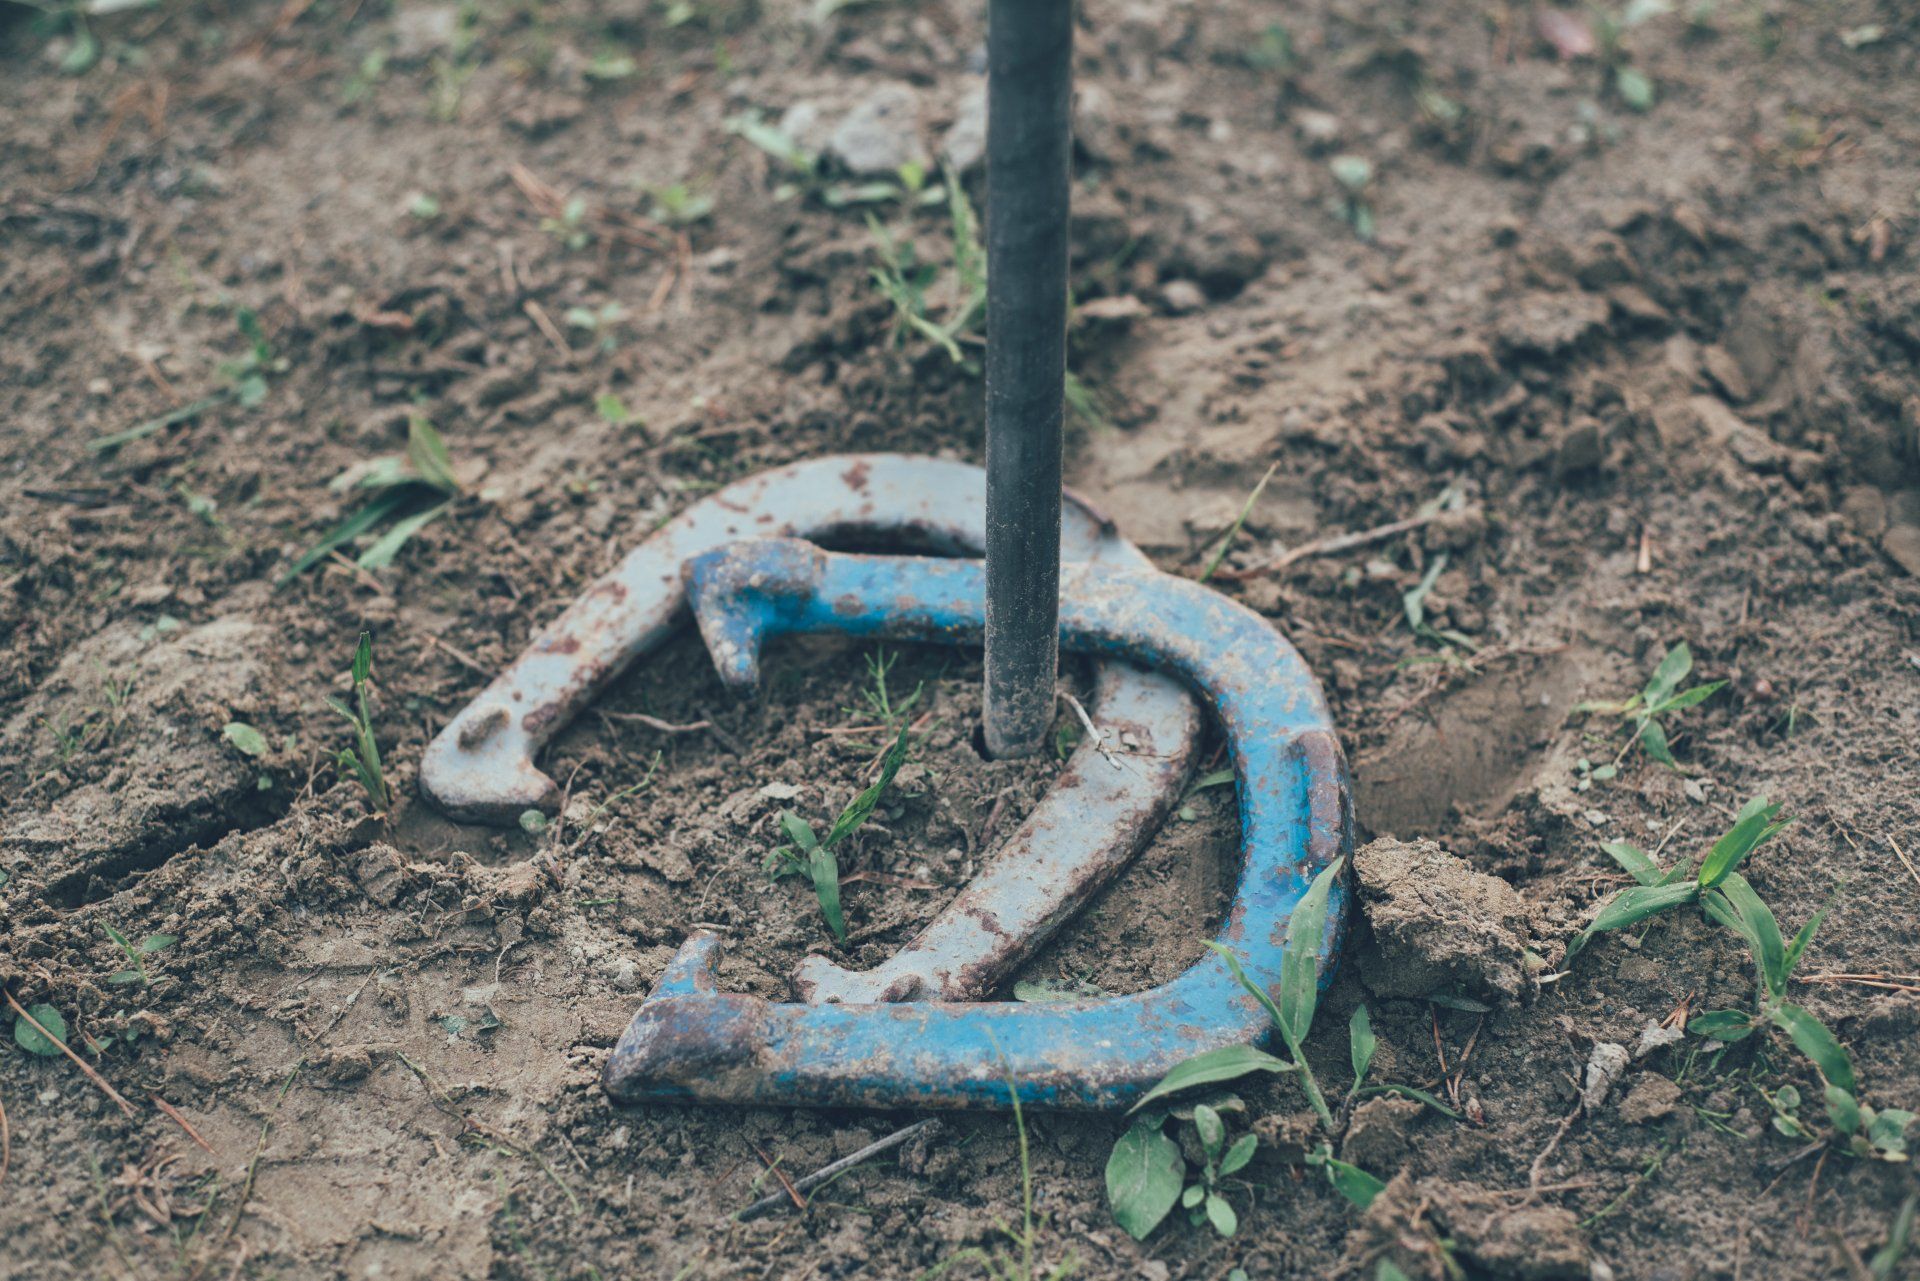 a blue horseshoe is sitting in the dirt next to a pole .